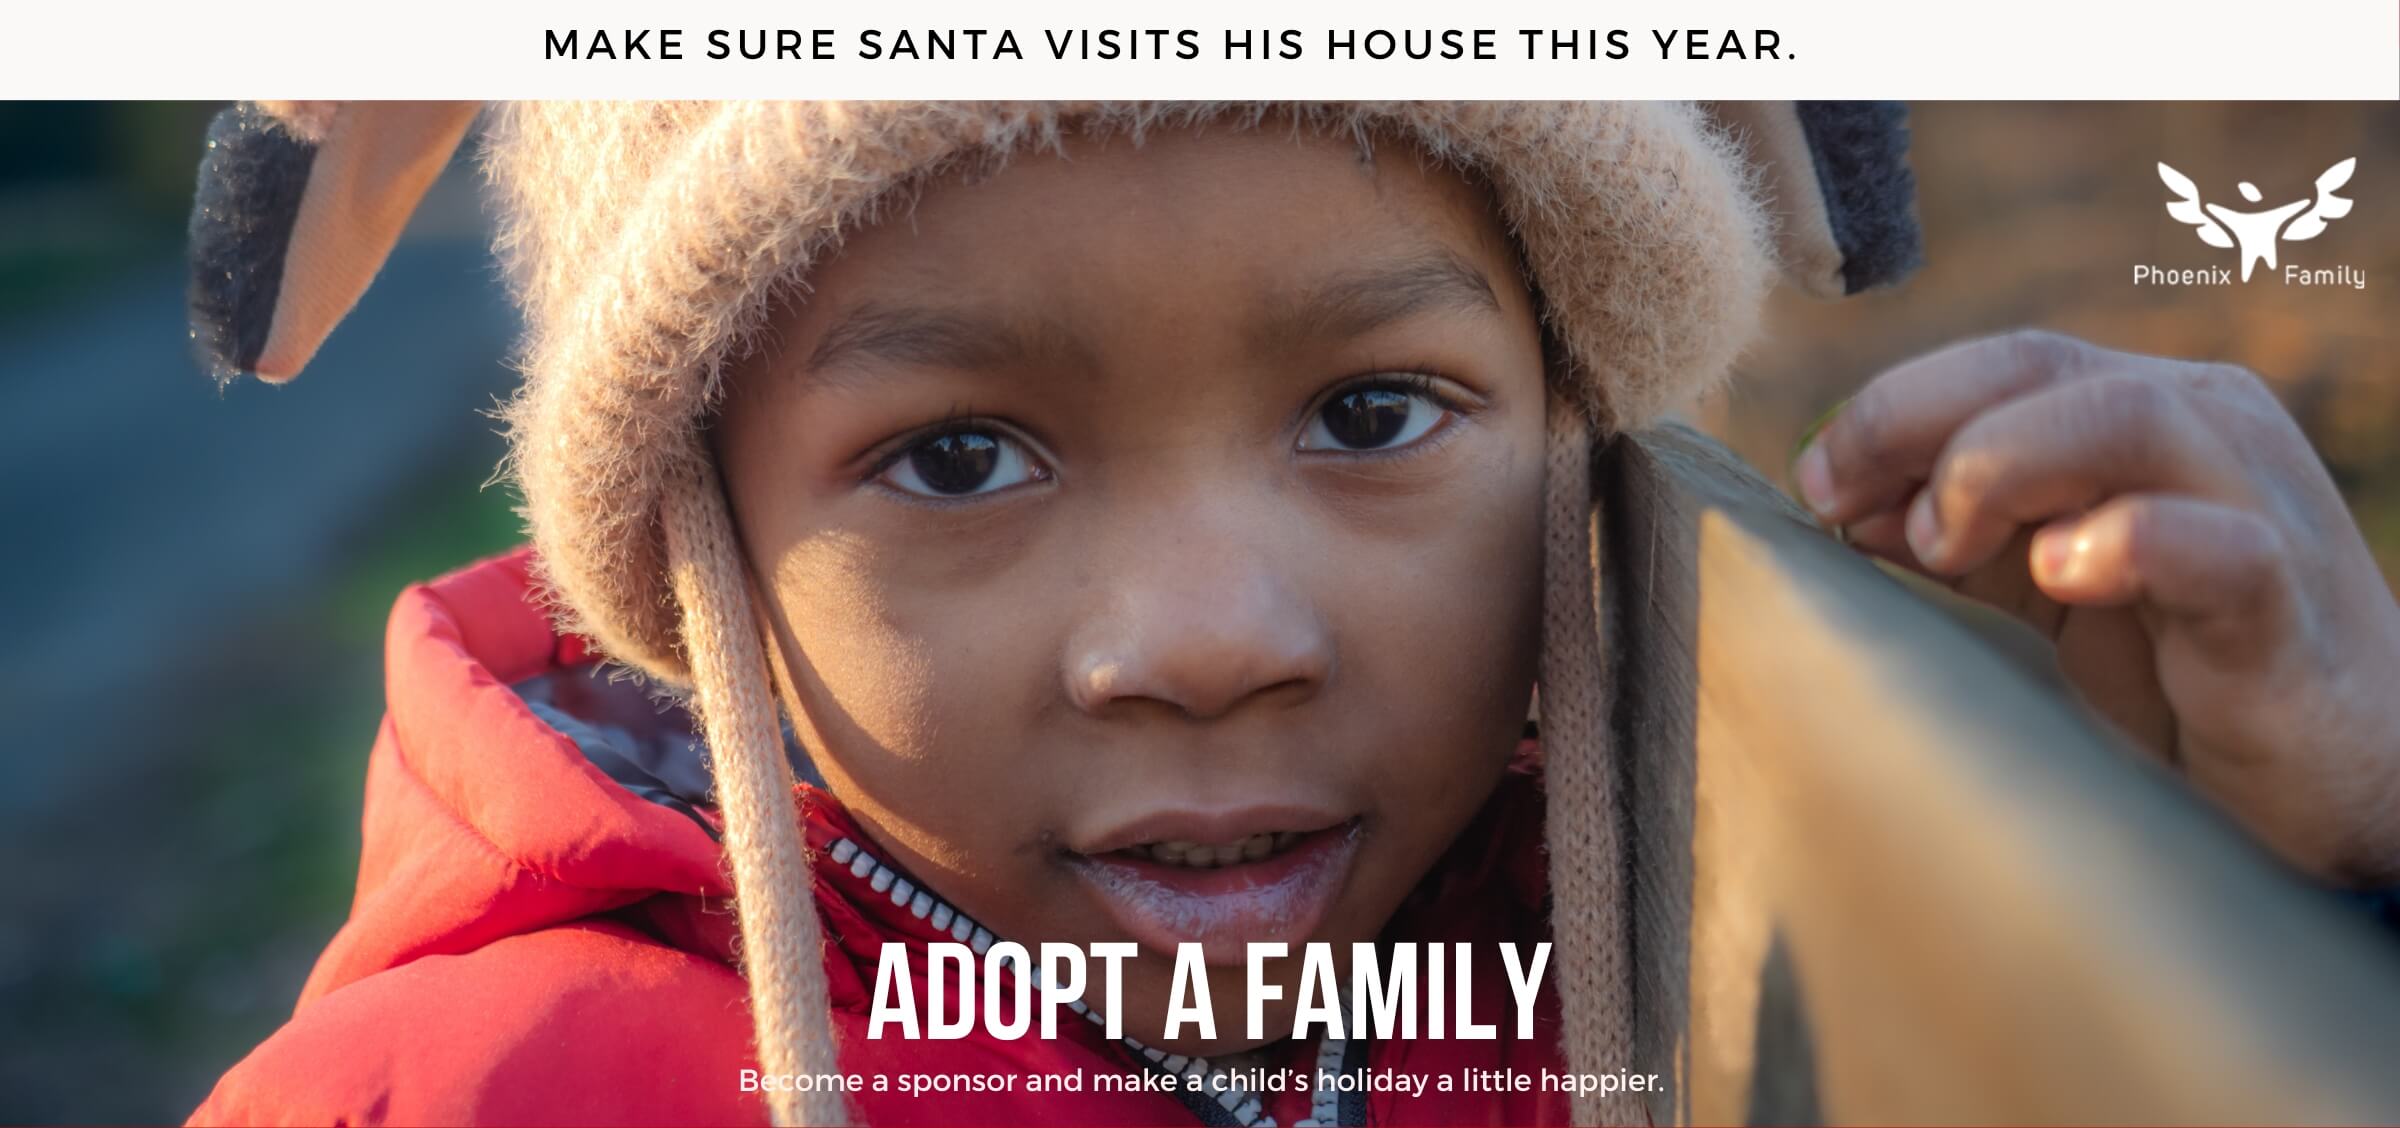 Image of African American child wearing a winter coat and hat looking directly at the camera. Words say: Adopt A Family. Become a sponsor and make a child's holiday a little happier.